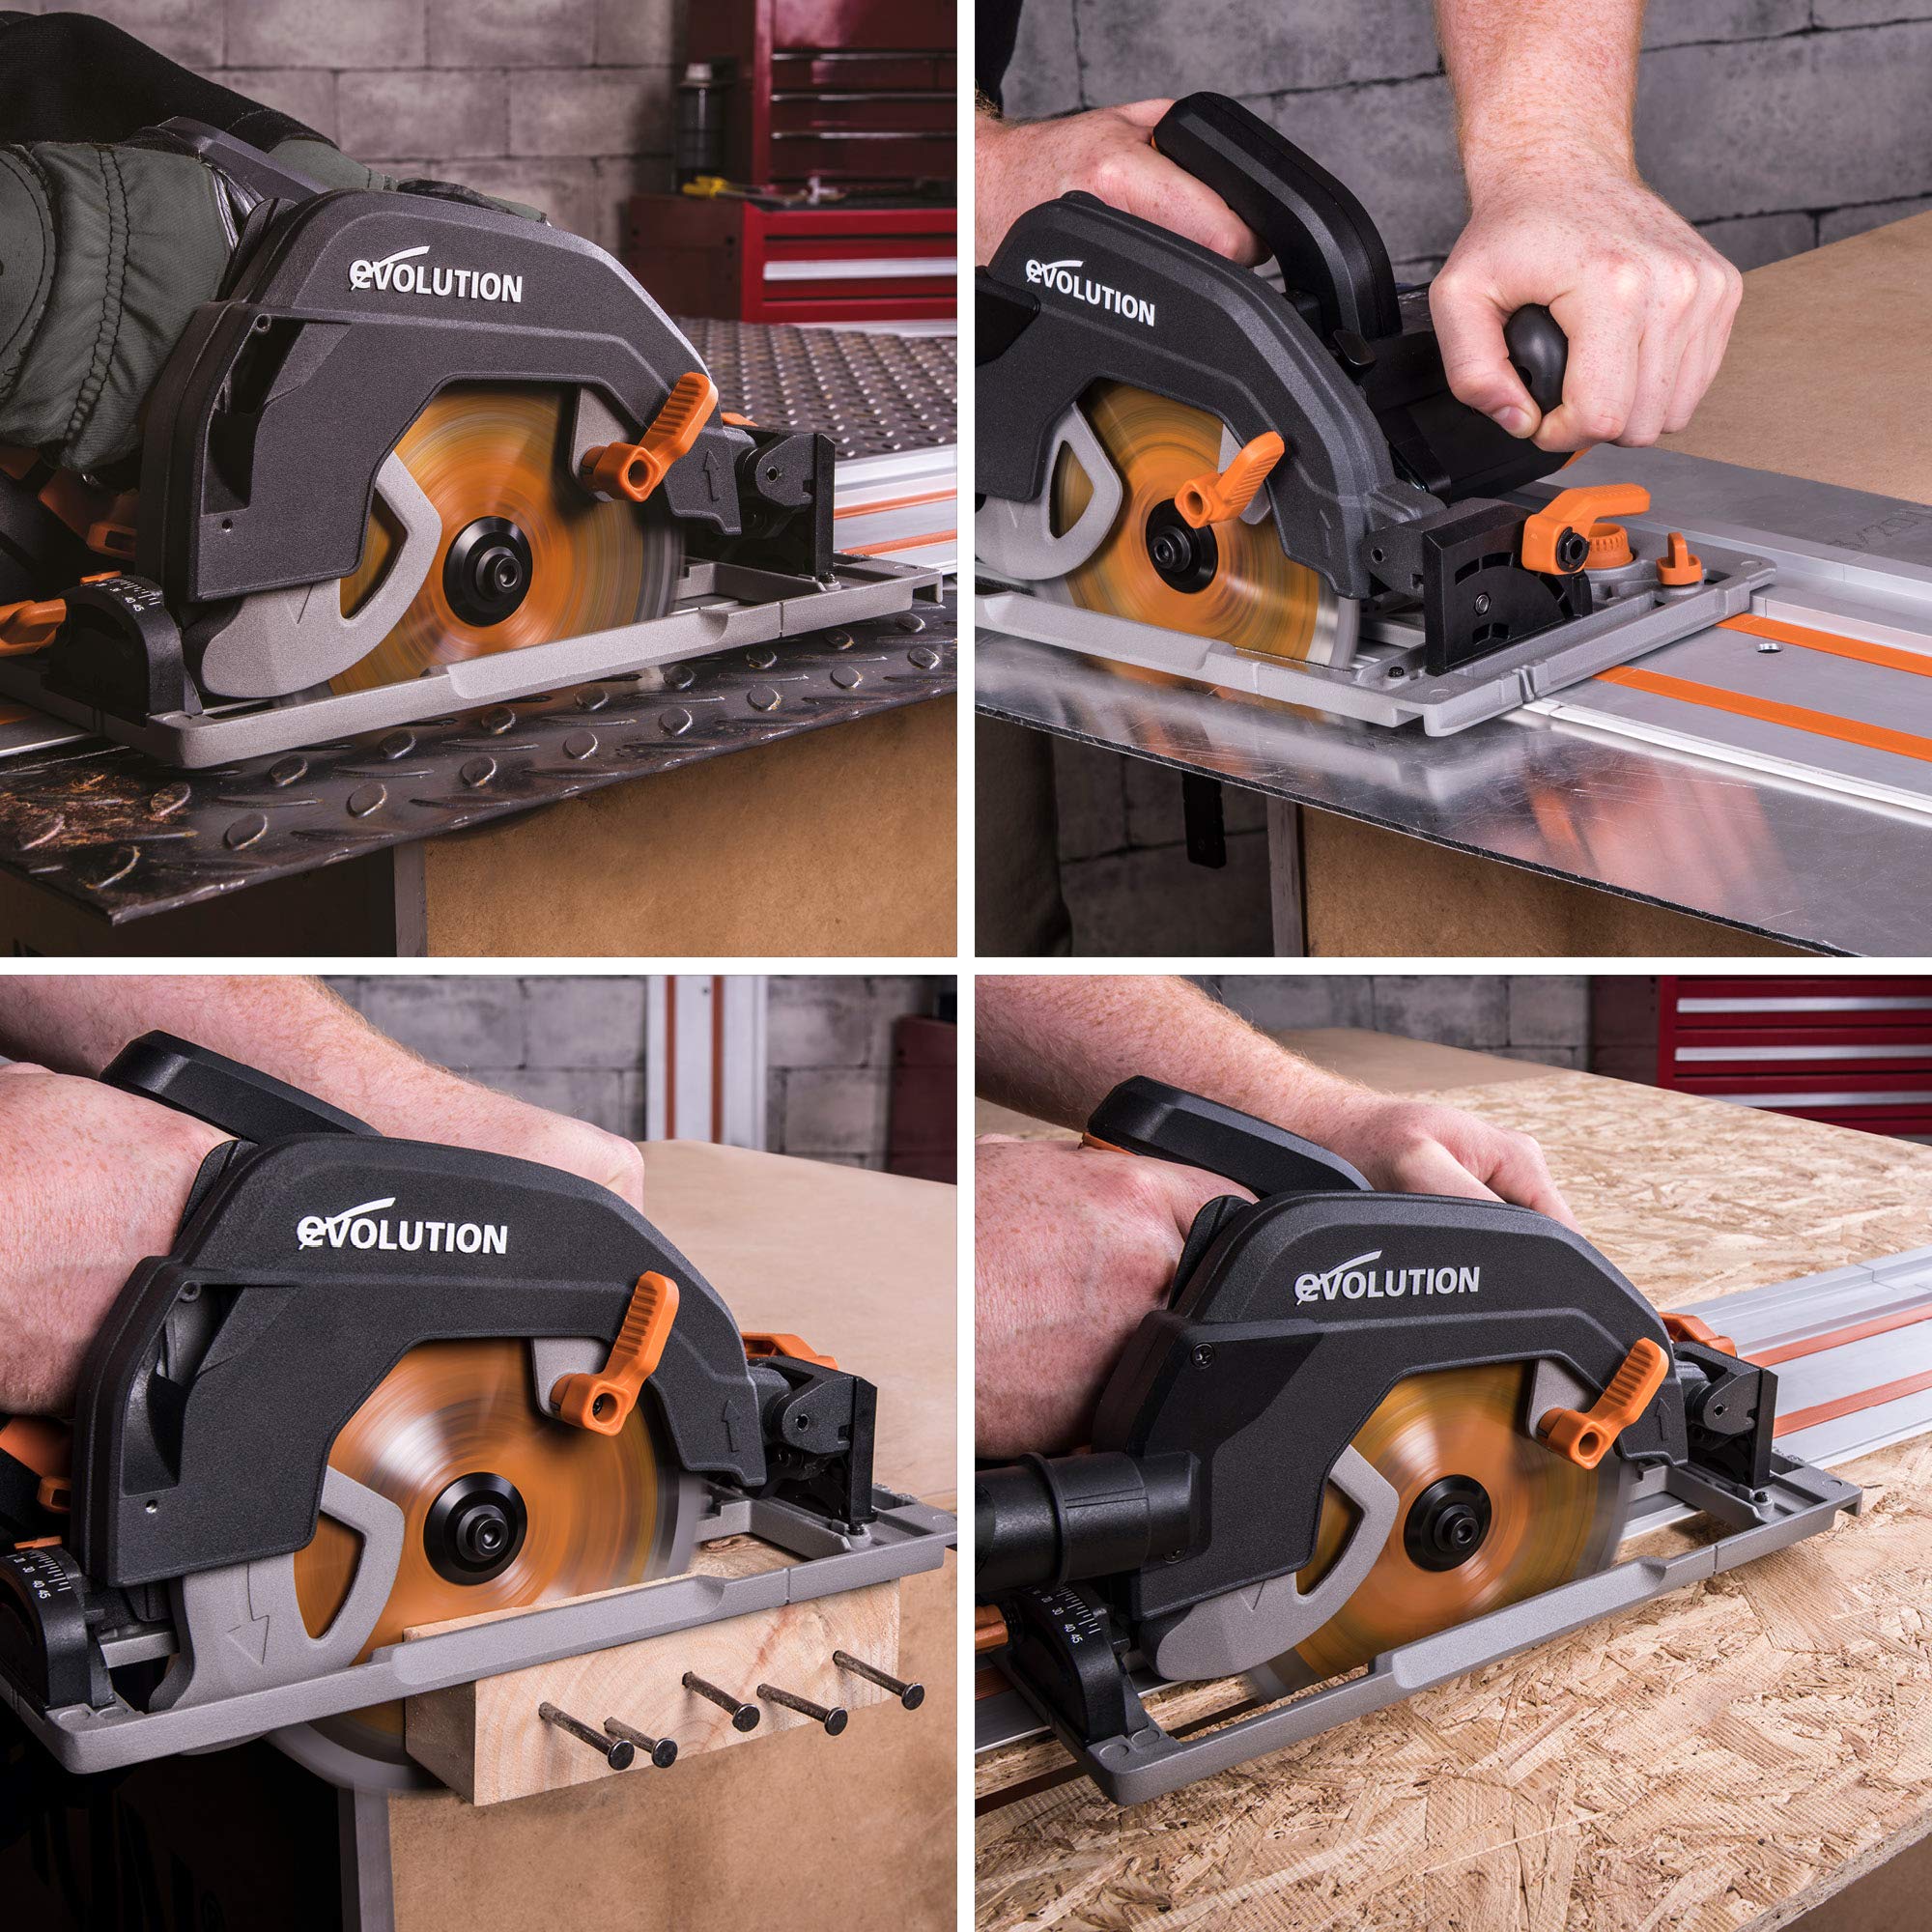 Evolution Power Tools R185CCSX Multi-Material Circular Track Saw Kit with 40" Track Included, TCT Blade Included, Cuts Wood, Plastic, Metal & More, 7-1/4 Inch